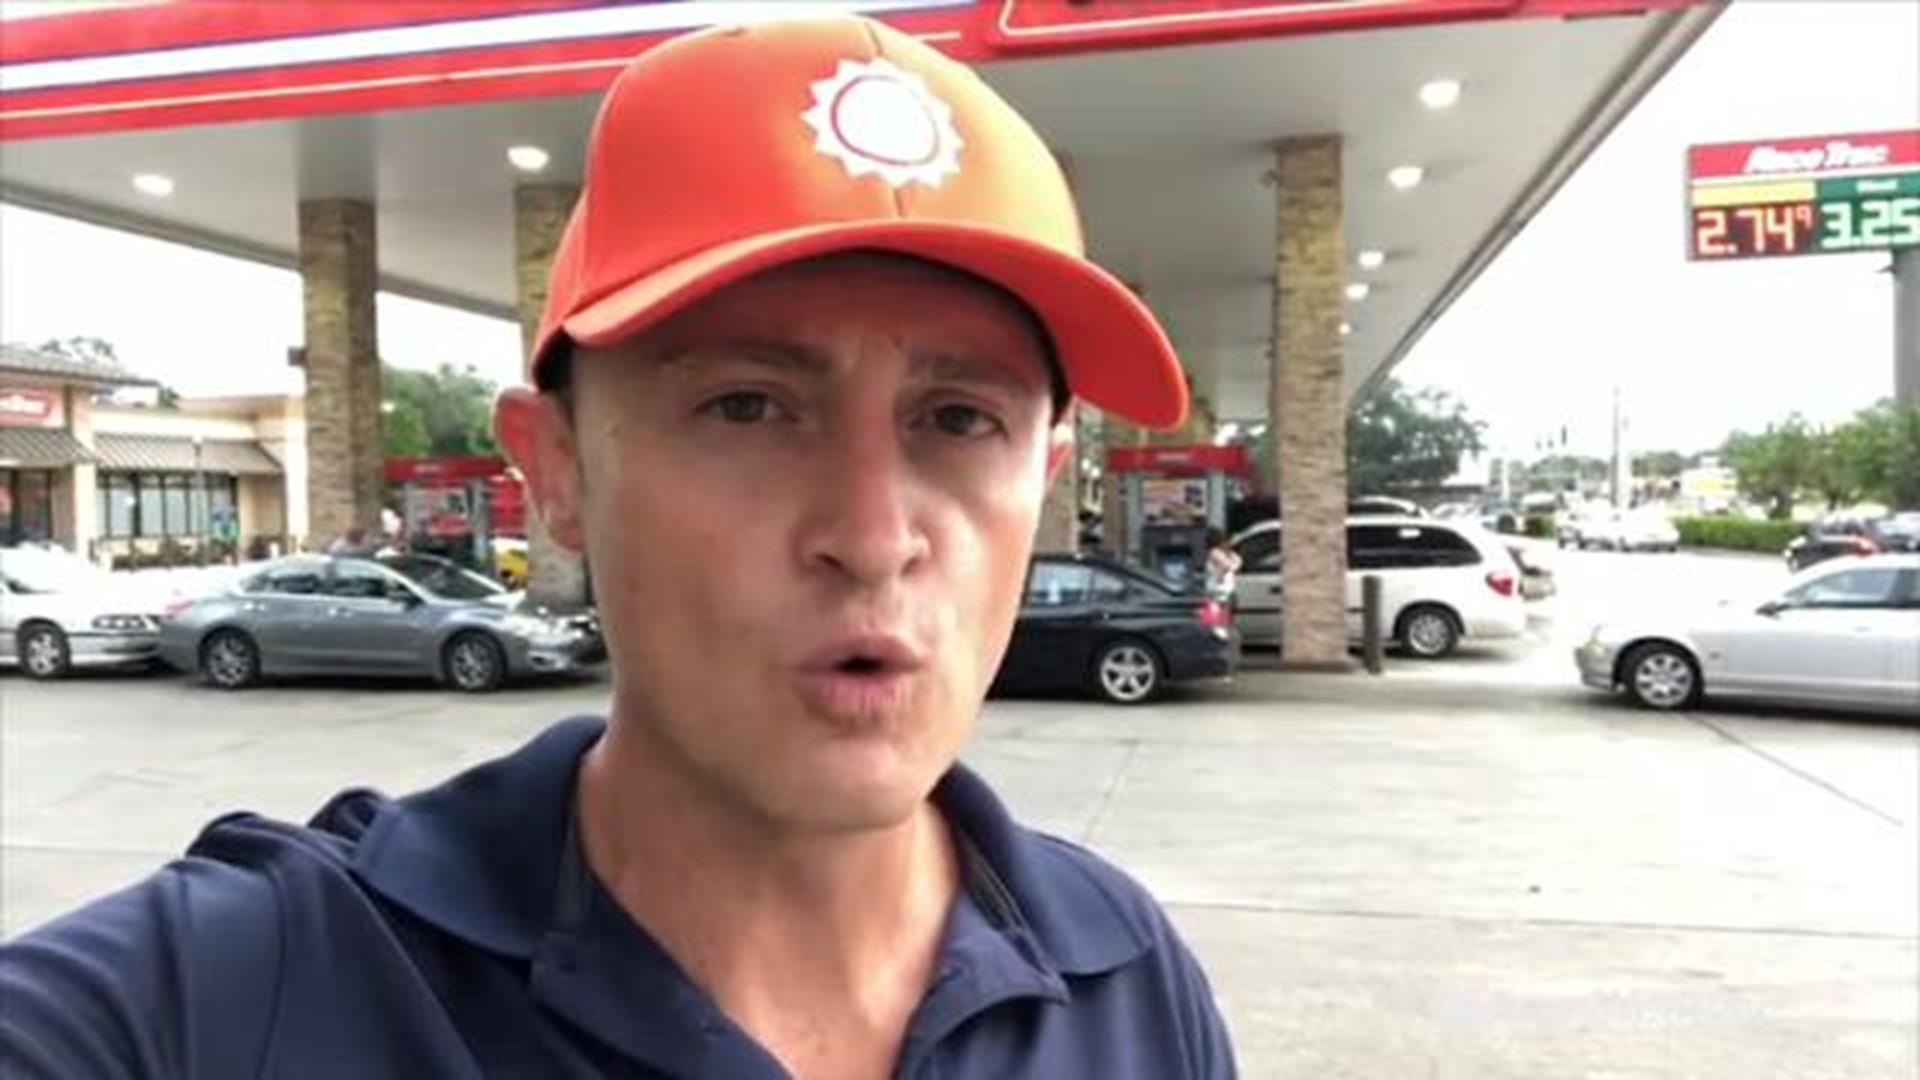 Florida residents are no strangers to hurricanes, which can take unpredictable turns. Gas is running low as residents prepare for the worst.